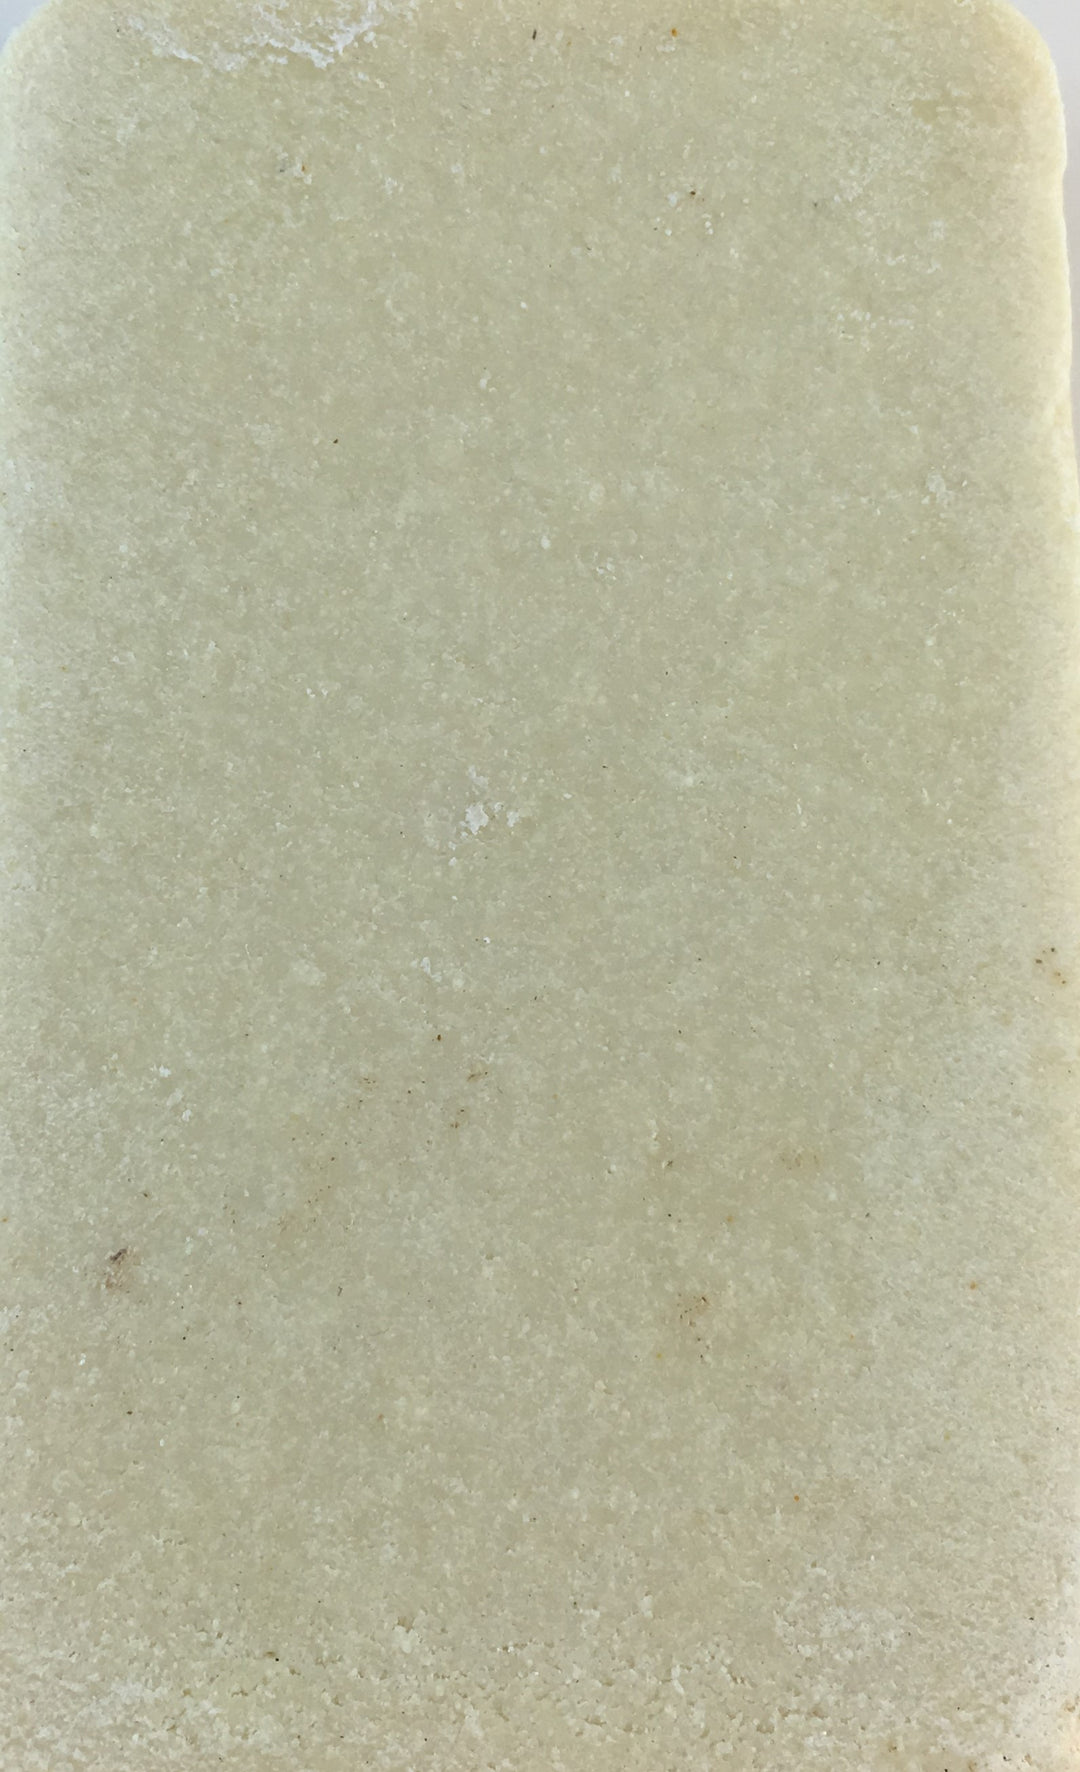 Castile Soap Bar (Tea Tree) from Handmade Naturals-not included in the 5 Soap Deal